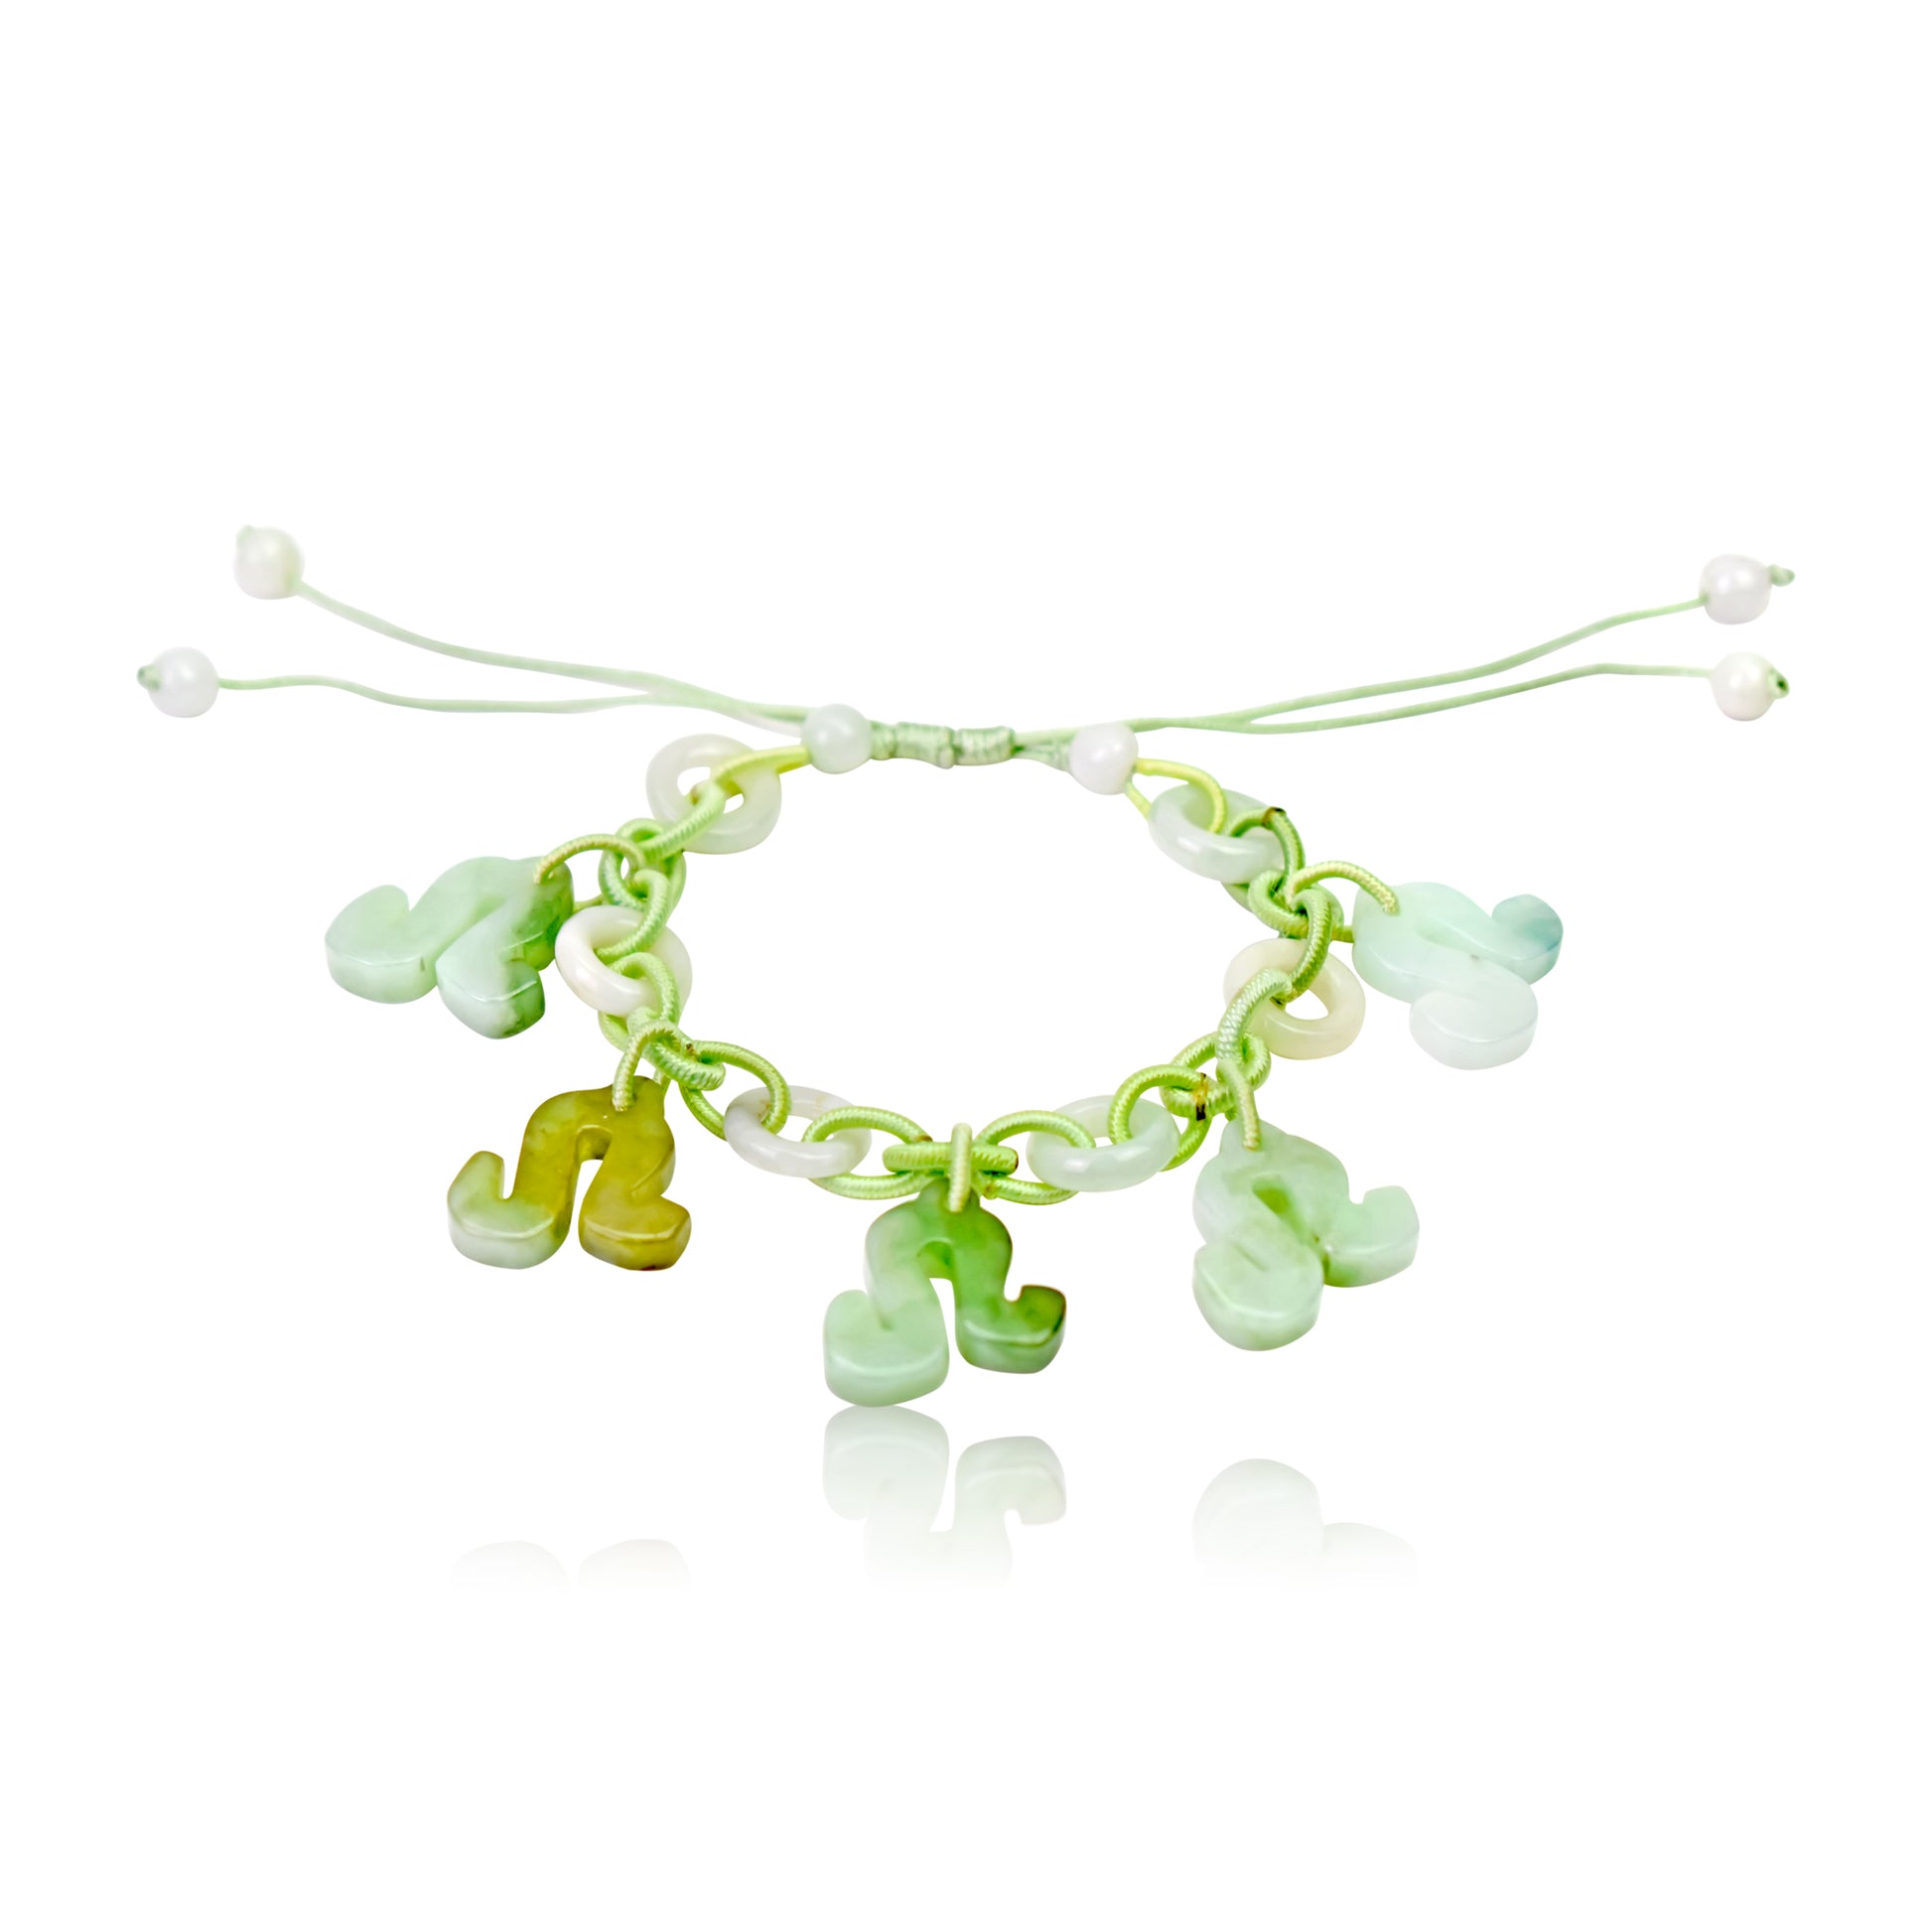 Wear the Force of the Lion on Your Wrist with Our Leo Jade Bracelet made with Sea Green Cord